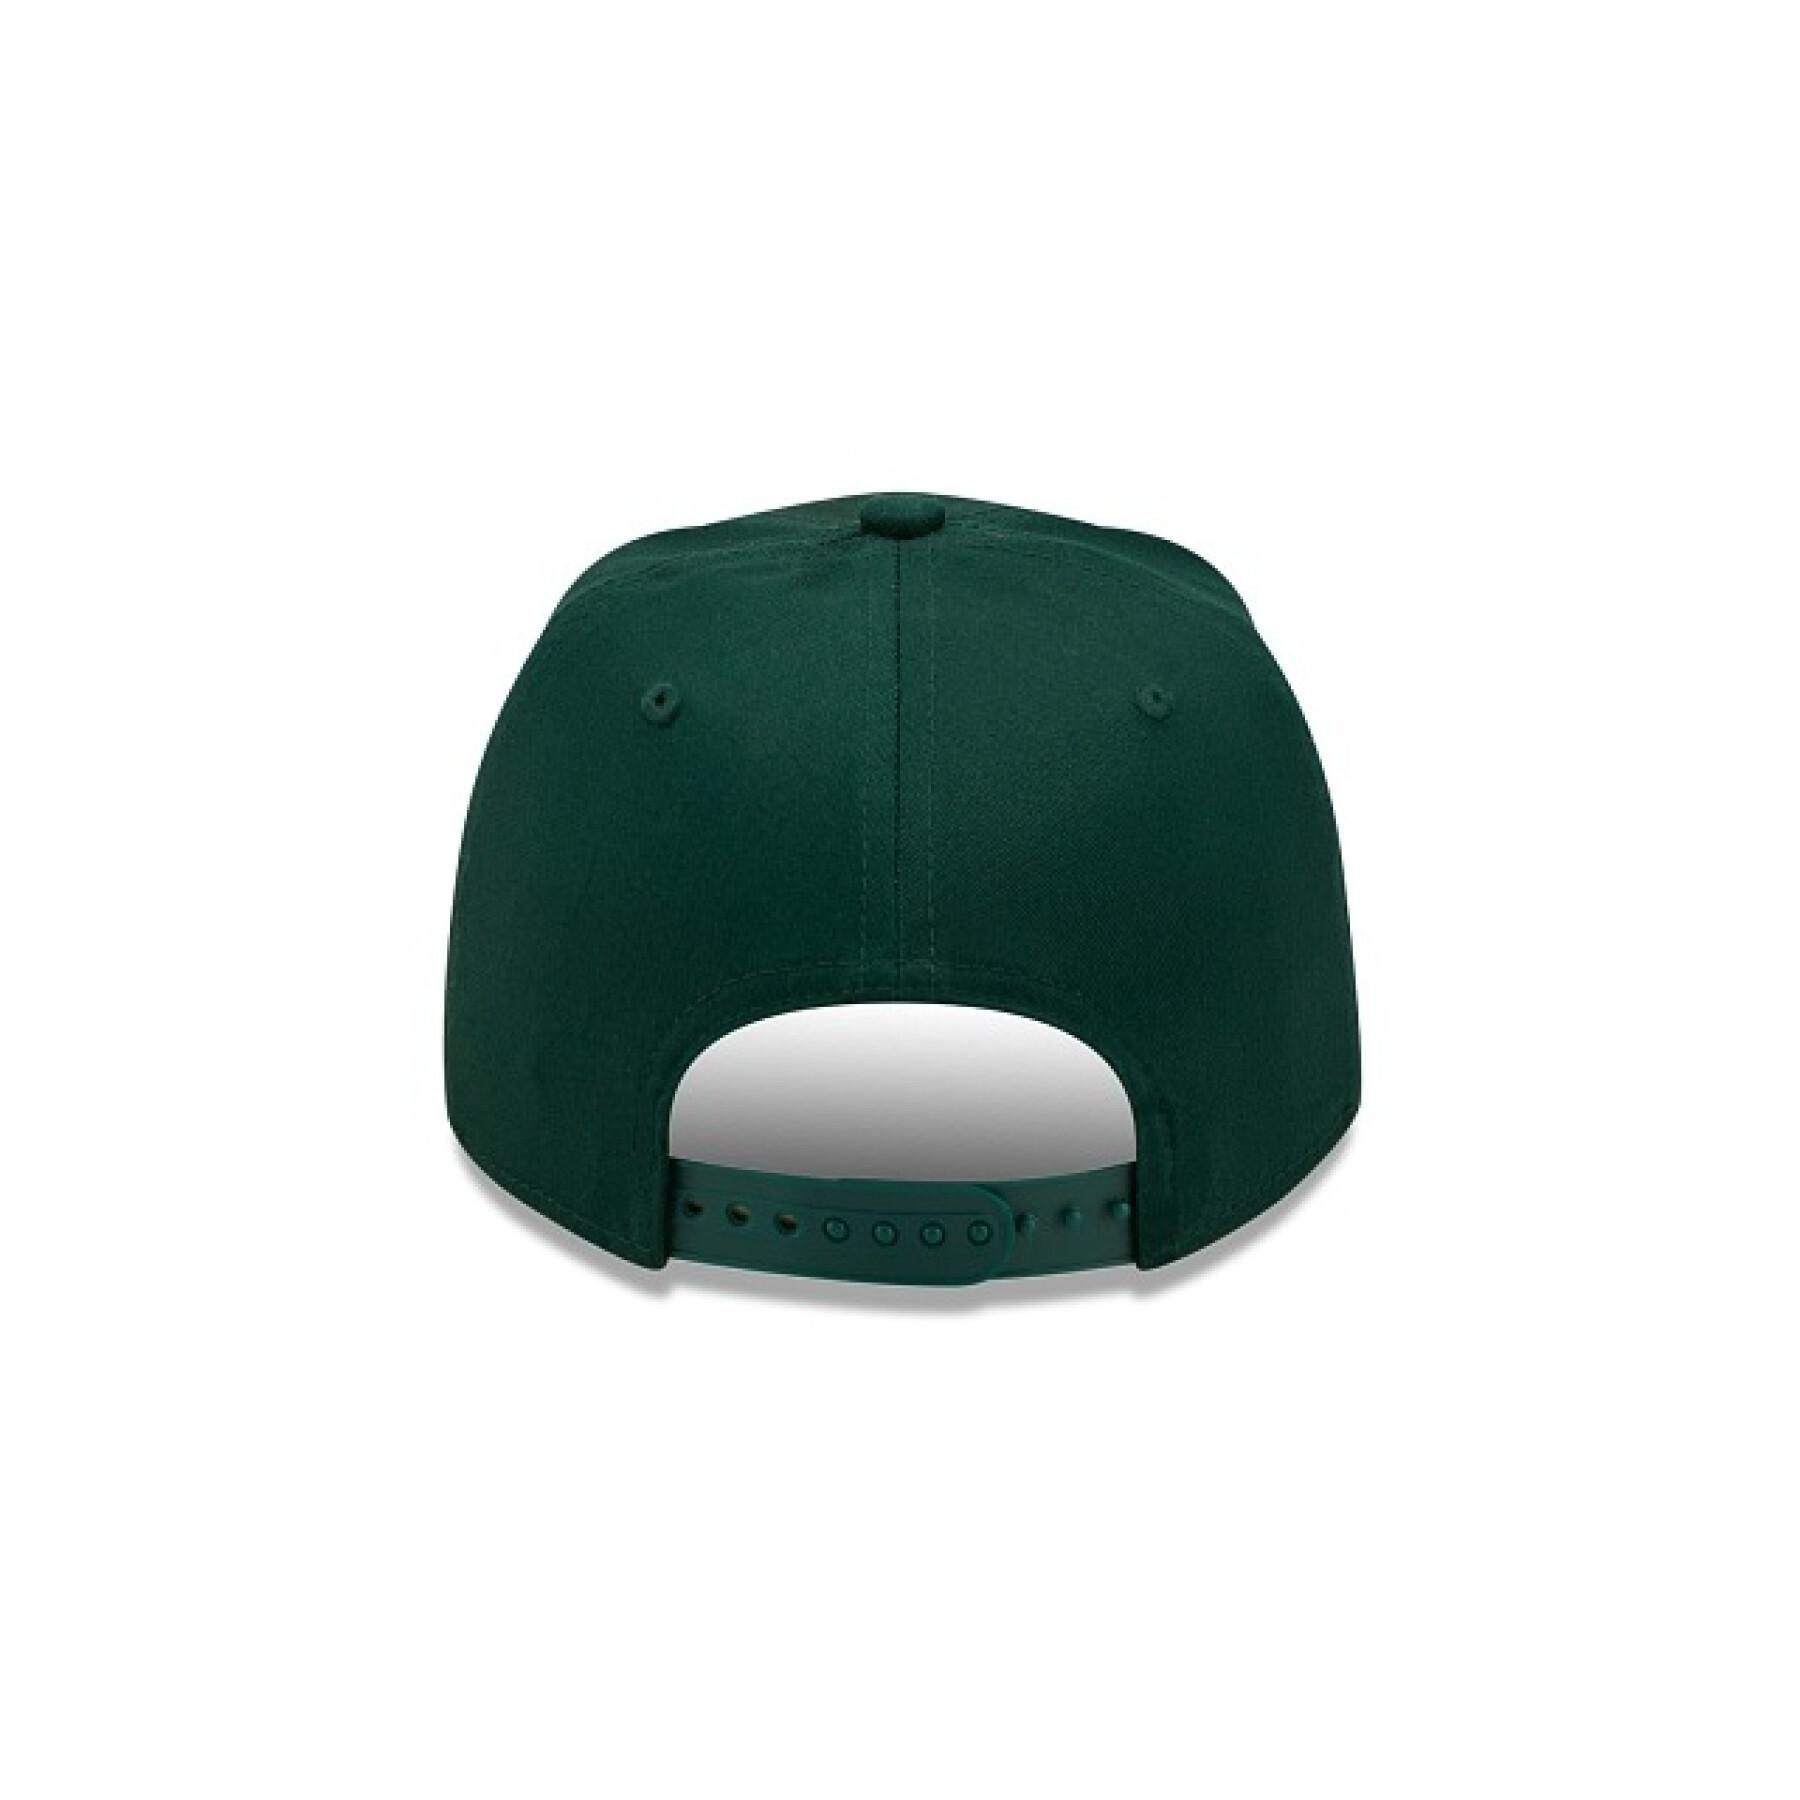 Casquette 9fifty Oakland Athletics